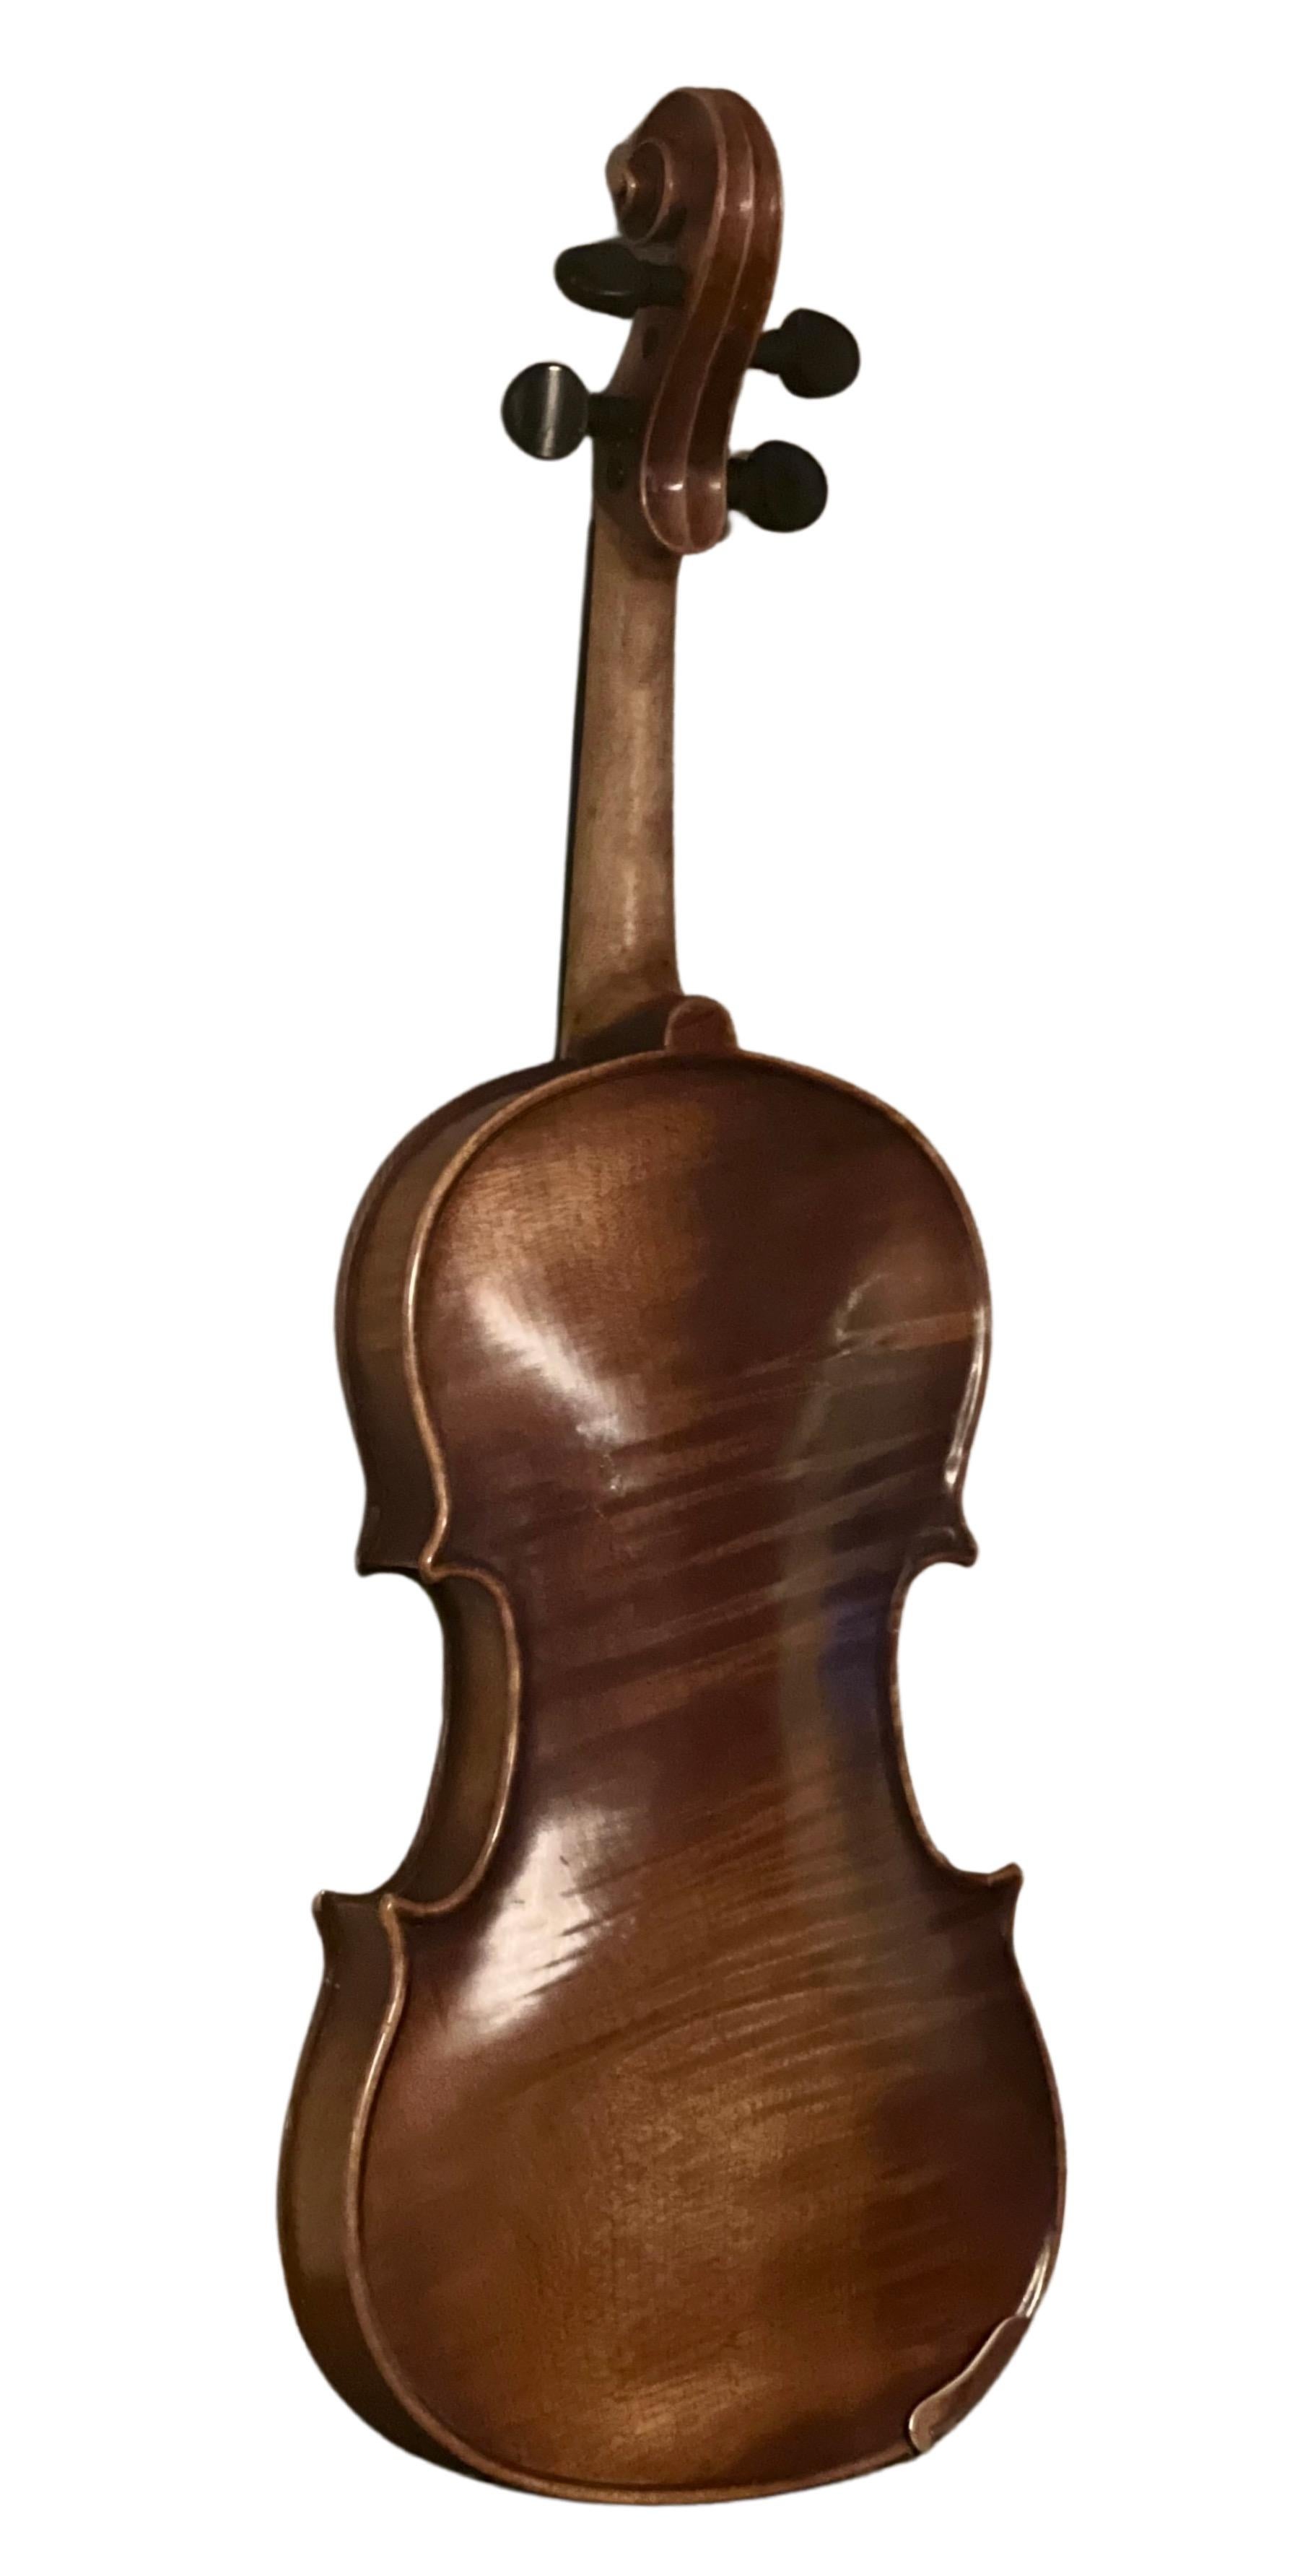 1970 3/4 E.R. Pfretzschner Hand-Crafted Violin in the Style of A. Stradivarius im Angebot 2